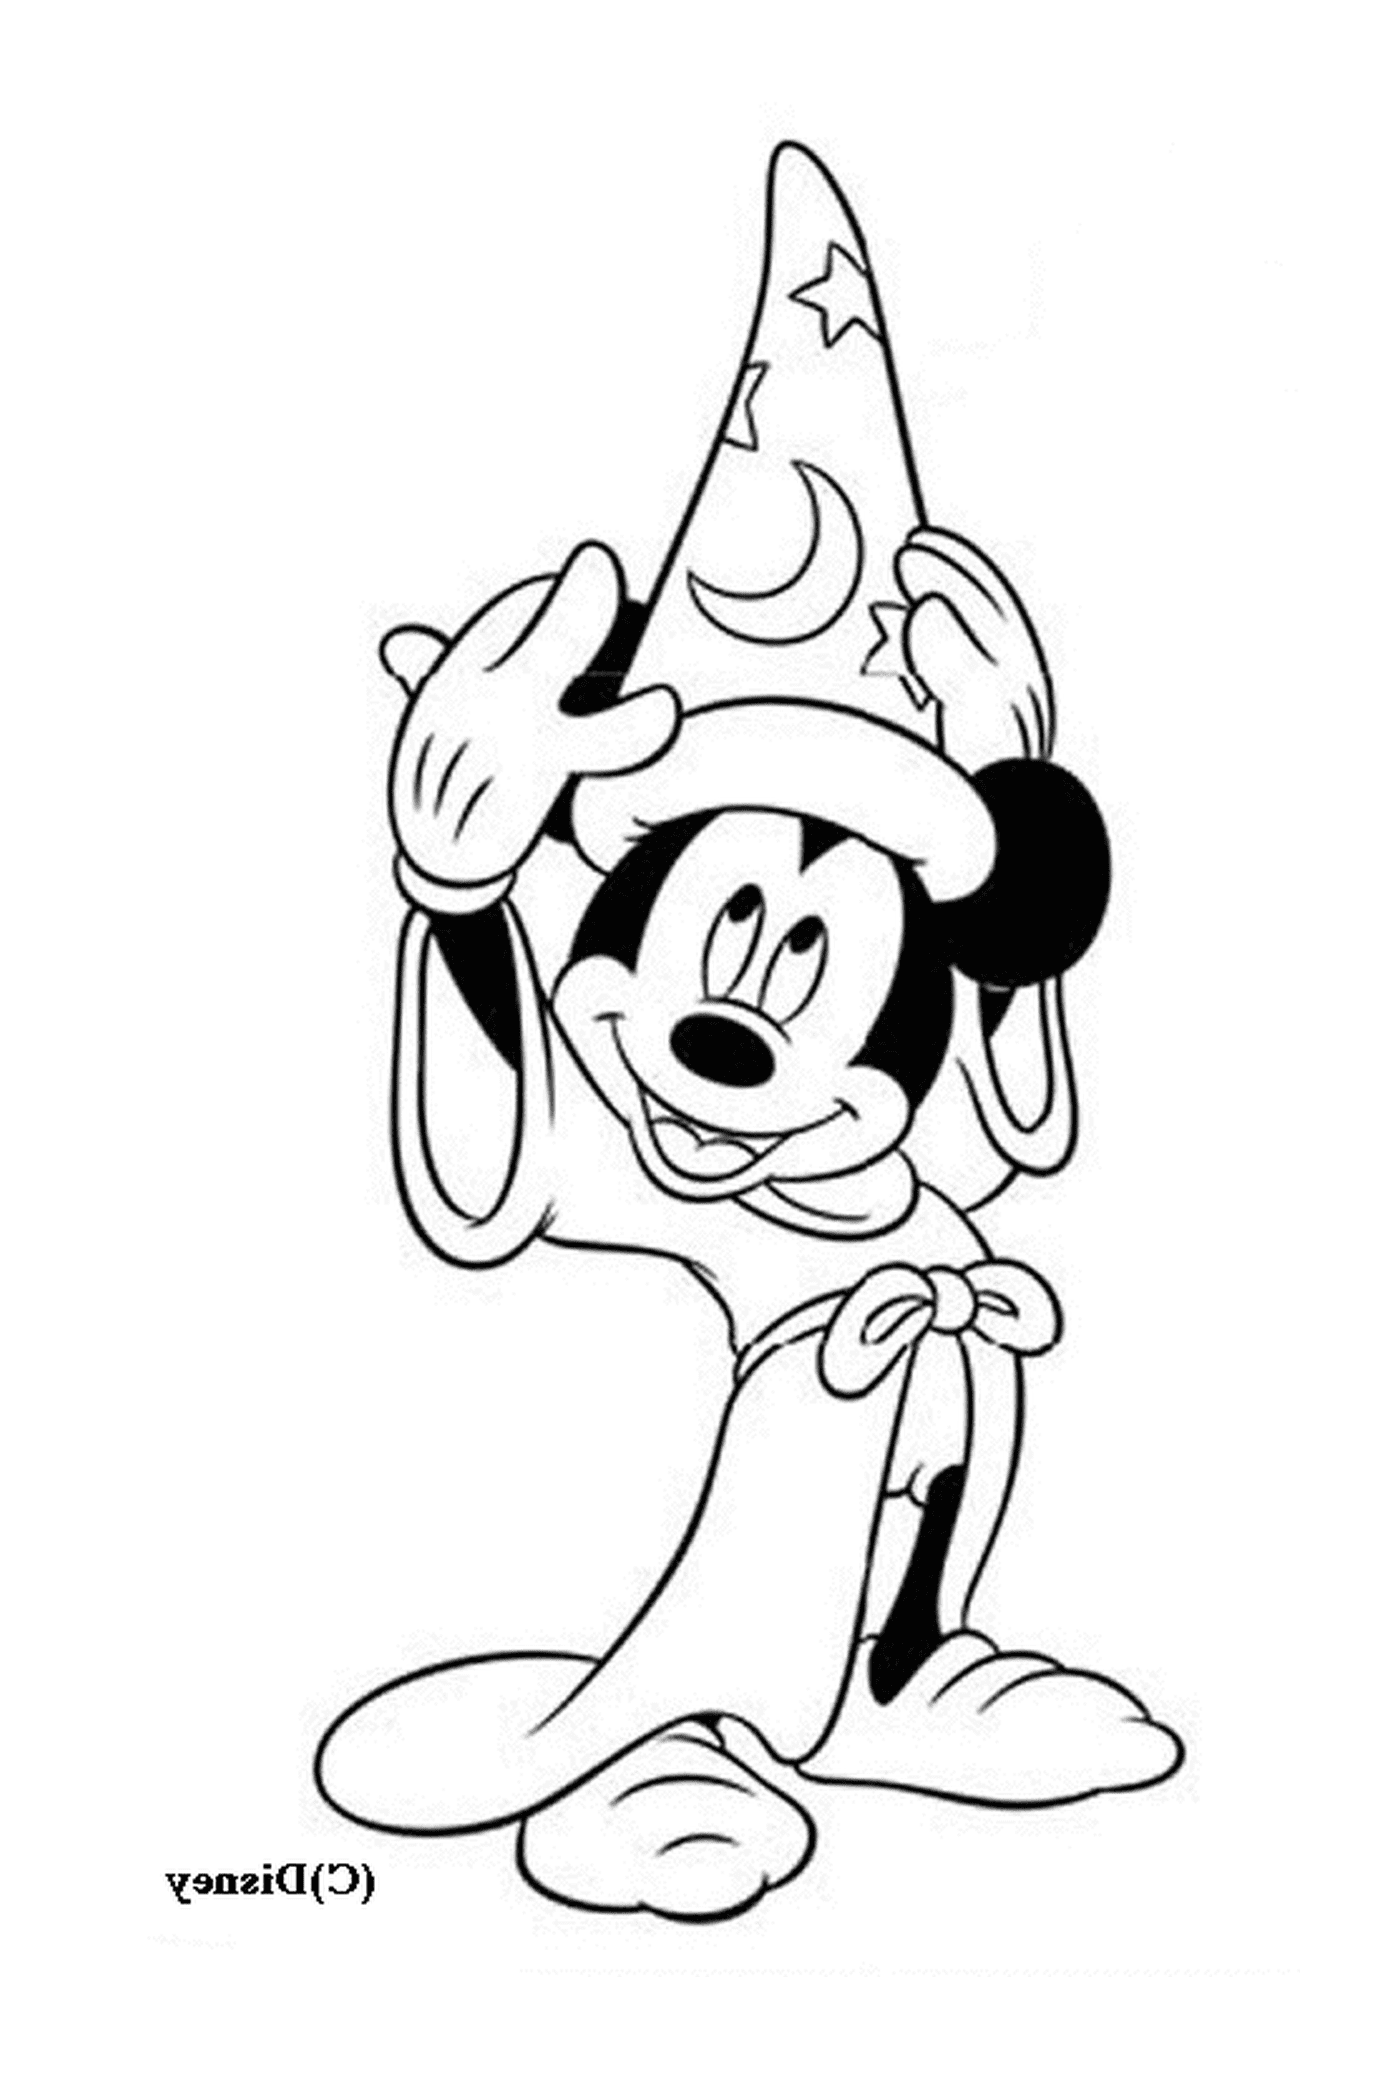  Mickey, it's magic: holding a hat in his hand 